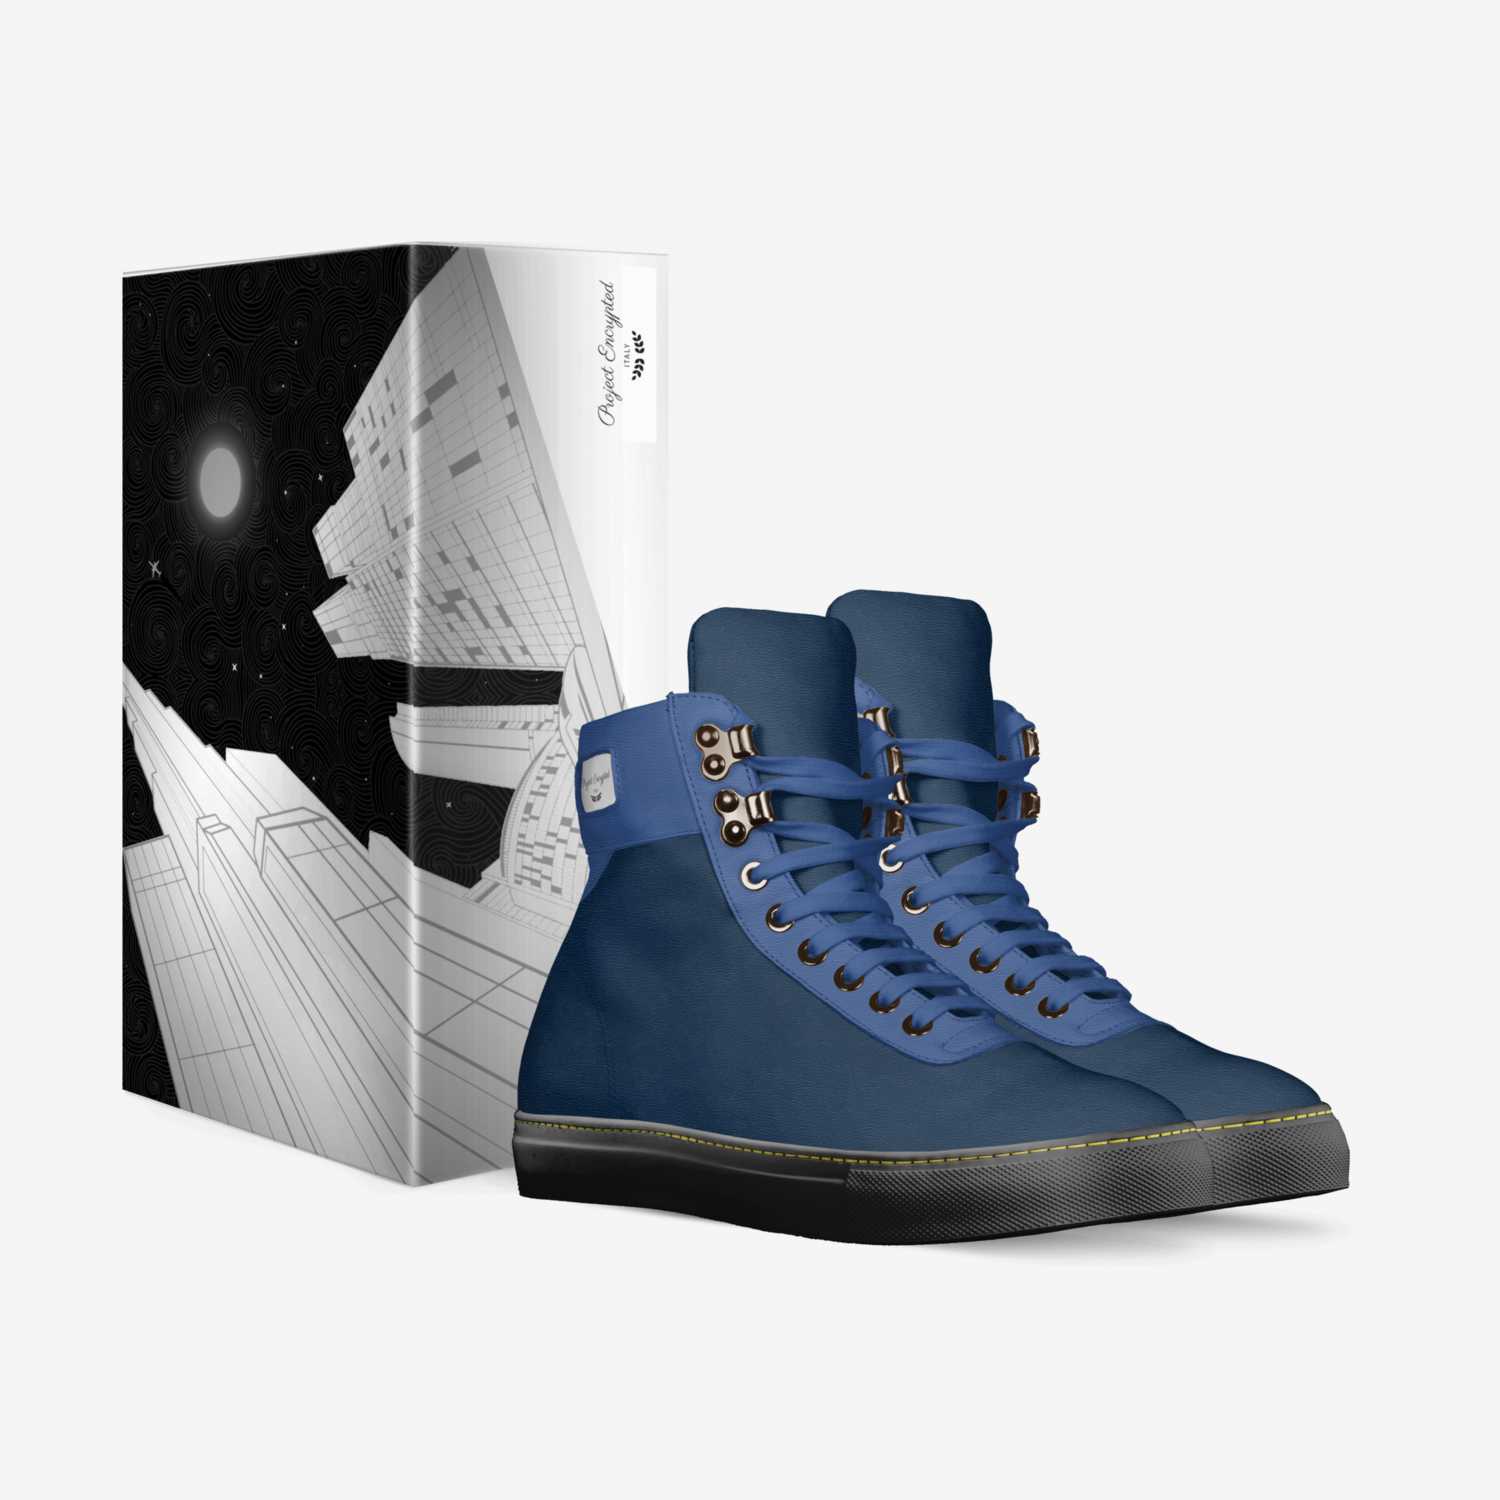 Project Encrypted custom made in Italy shoes by Dalton Ford | Box view